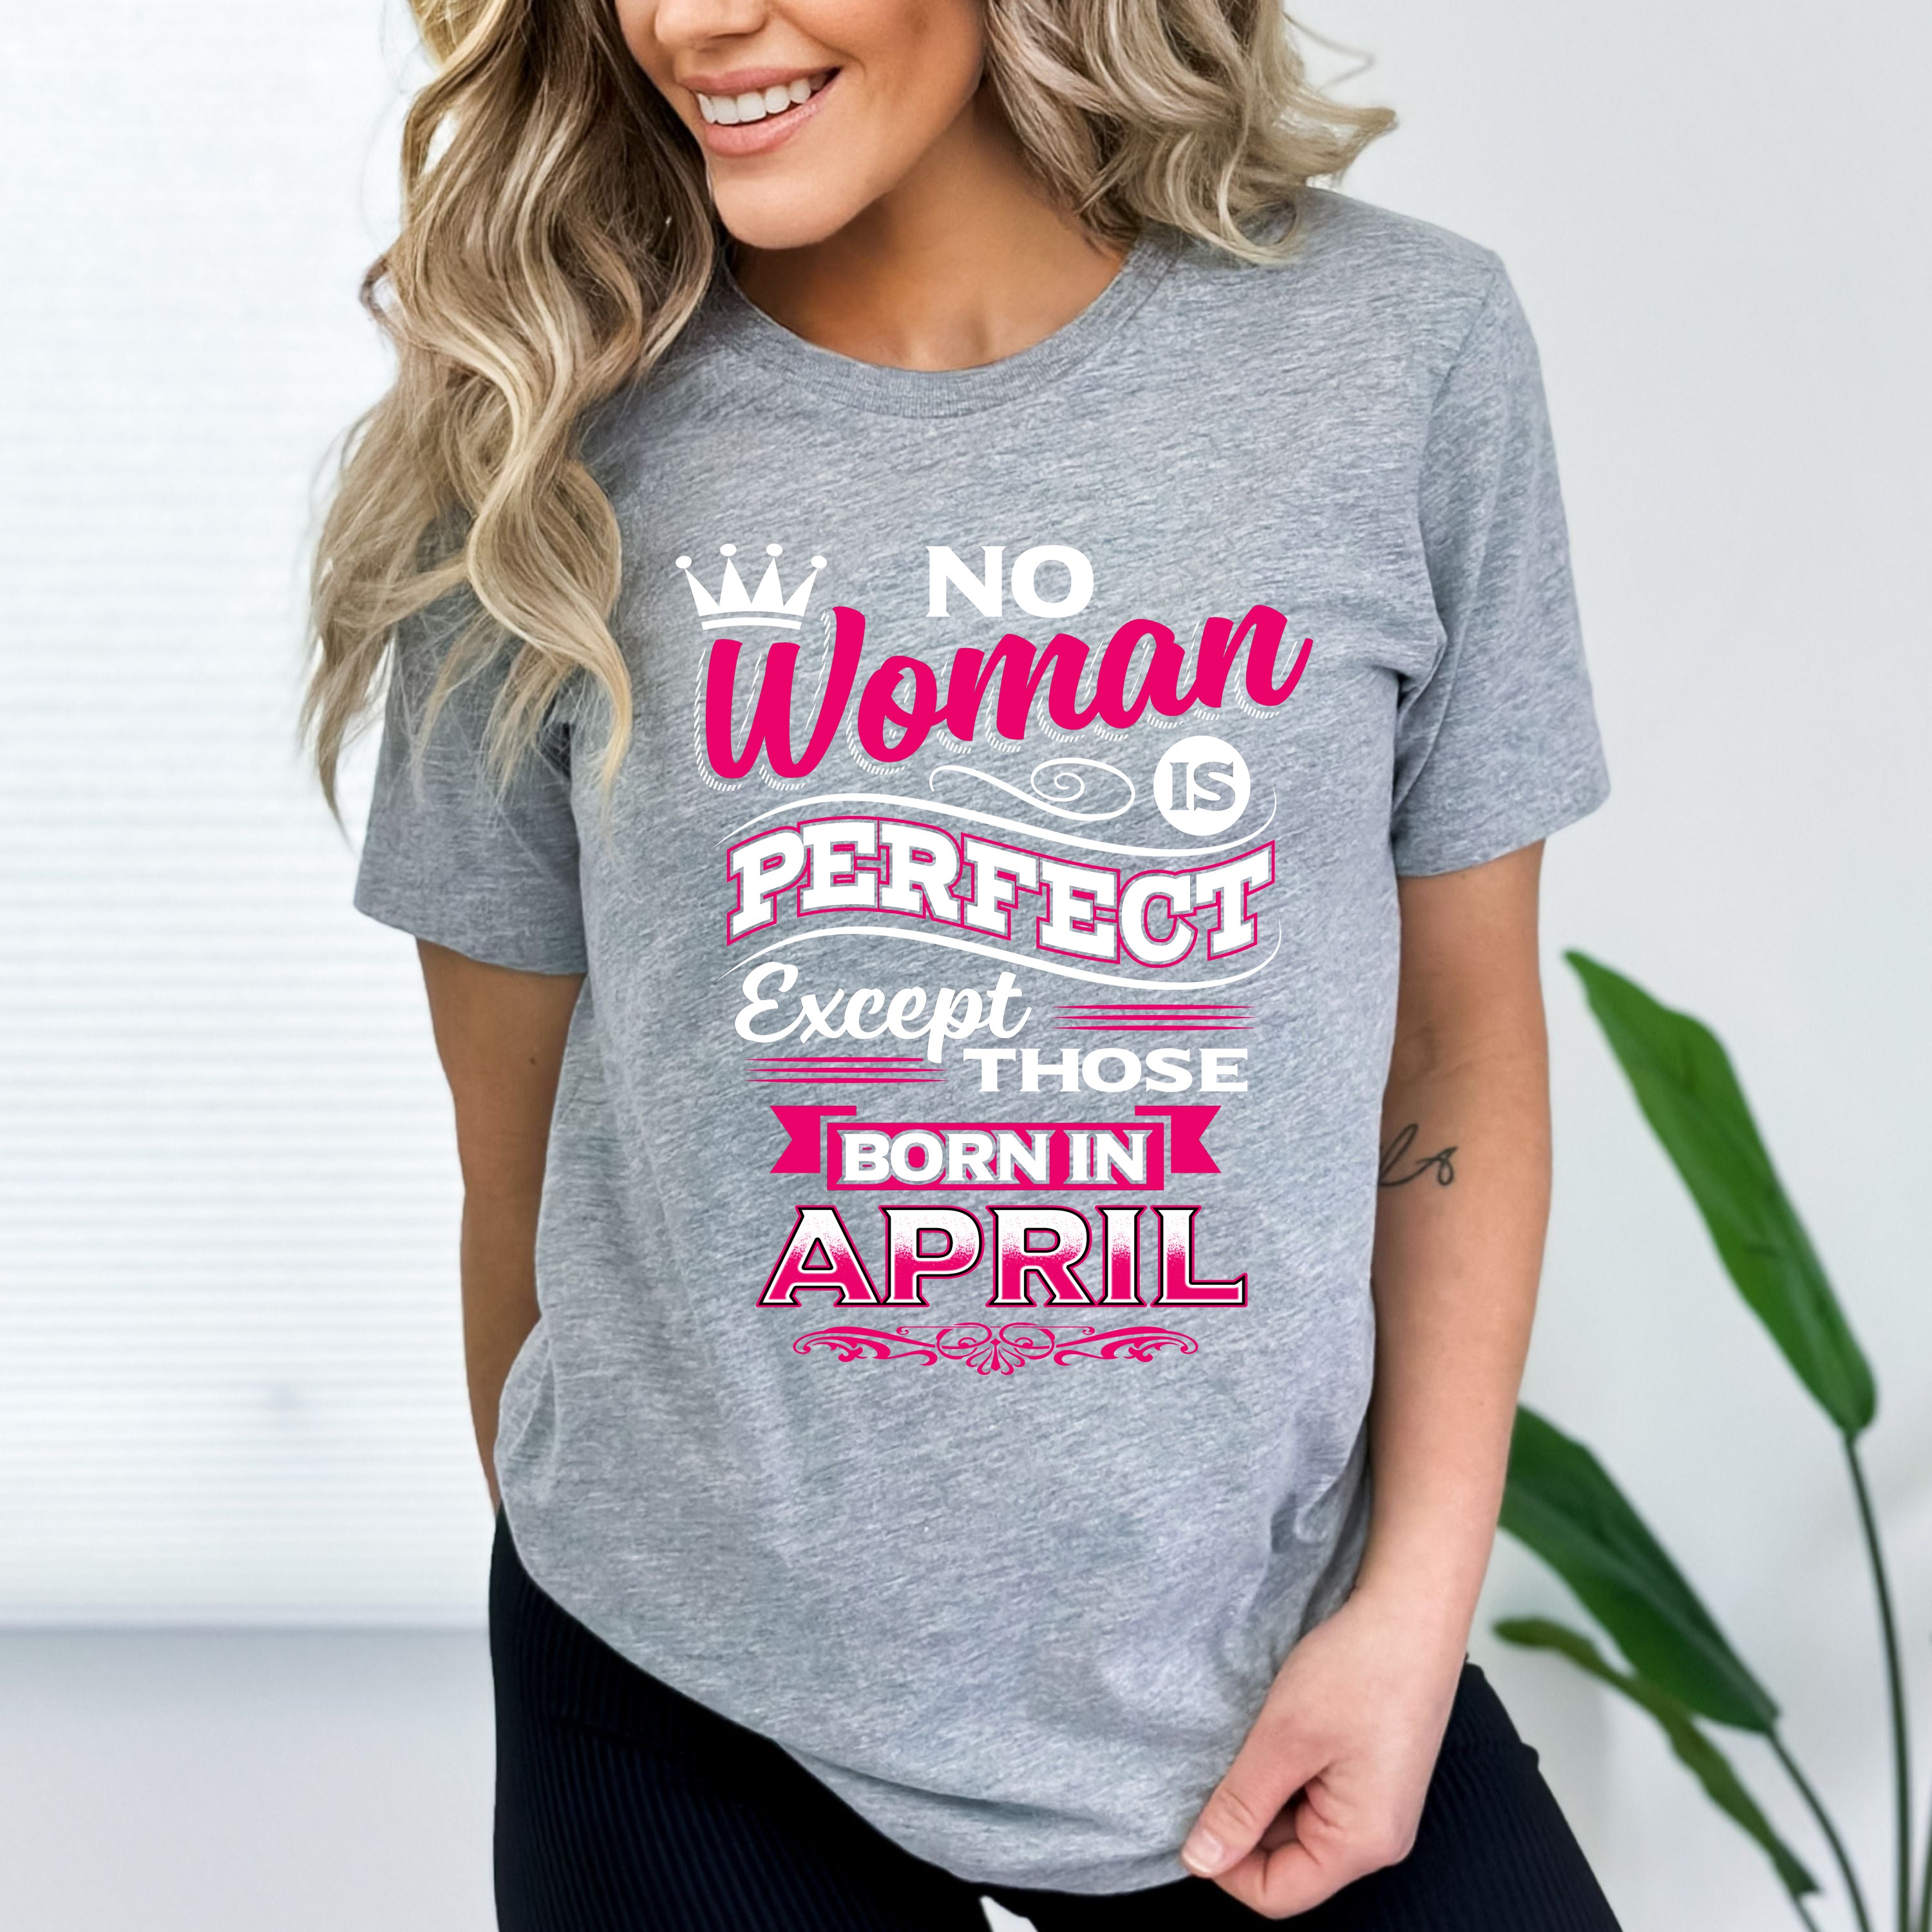 "No Woman Is Perfect Except Those Born In April"